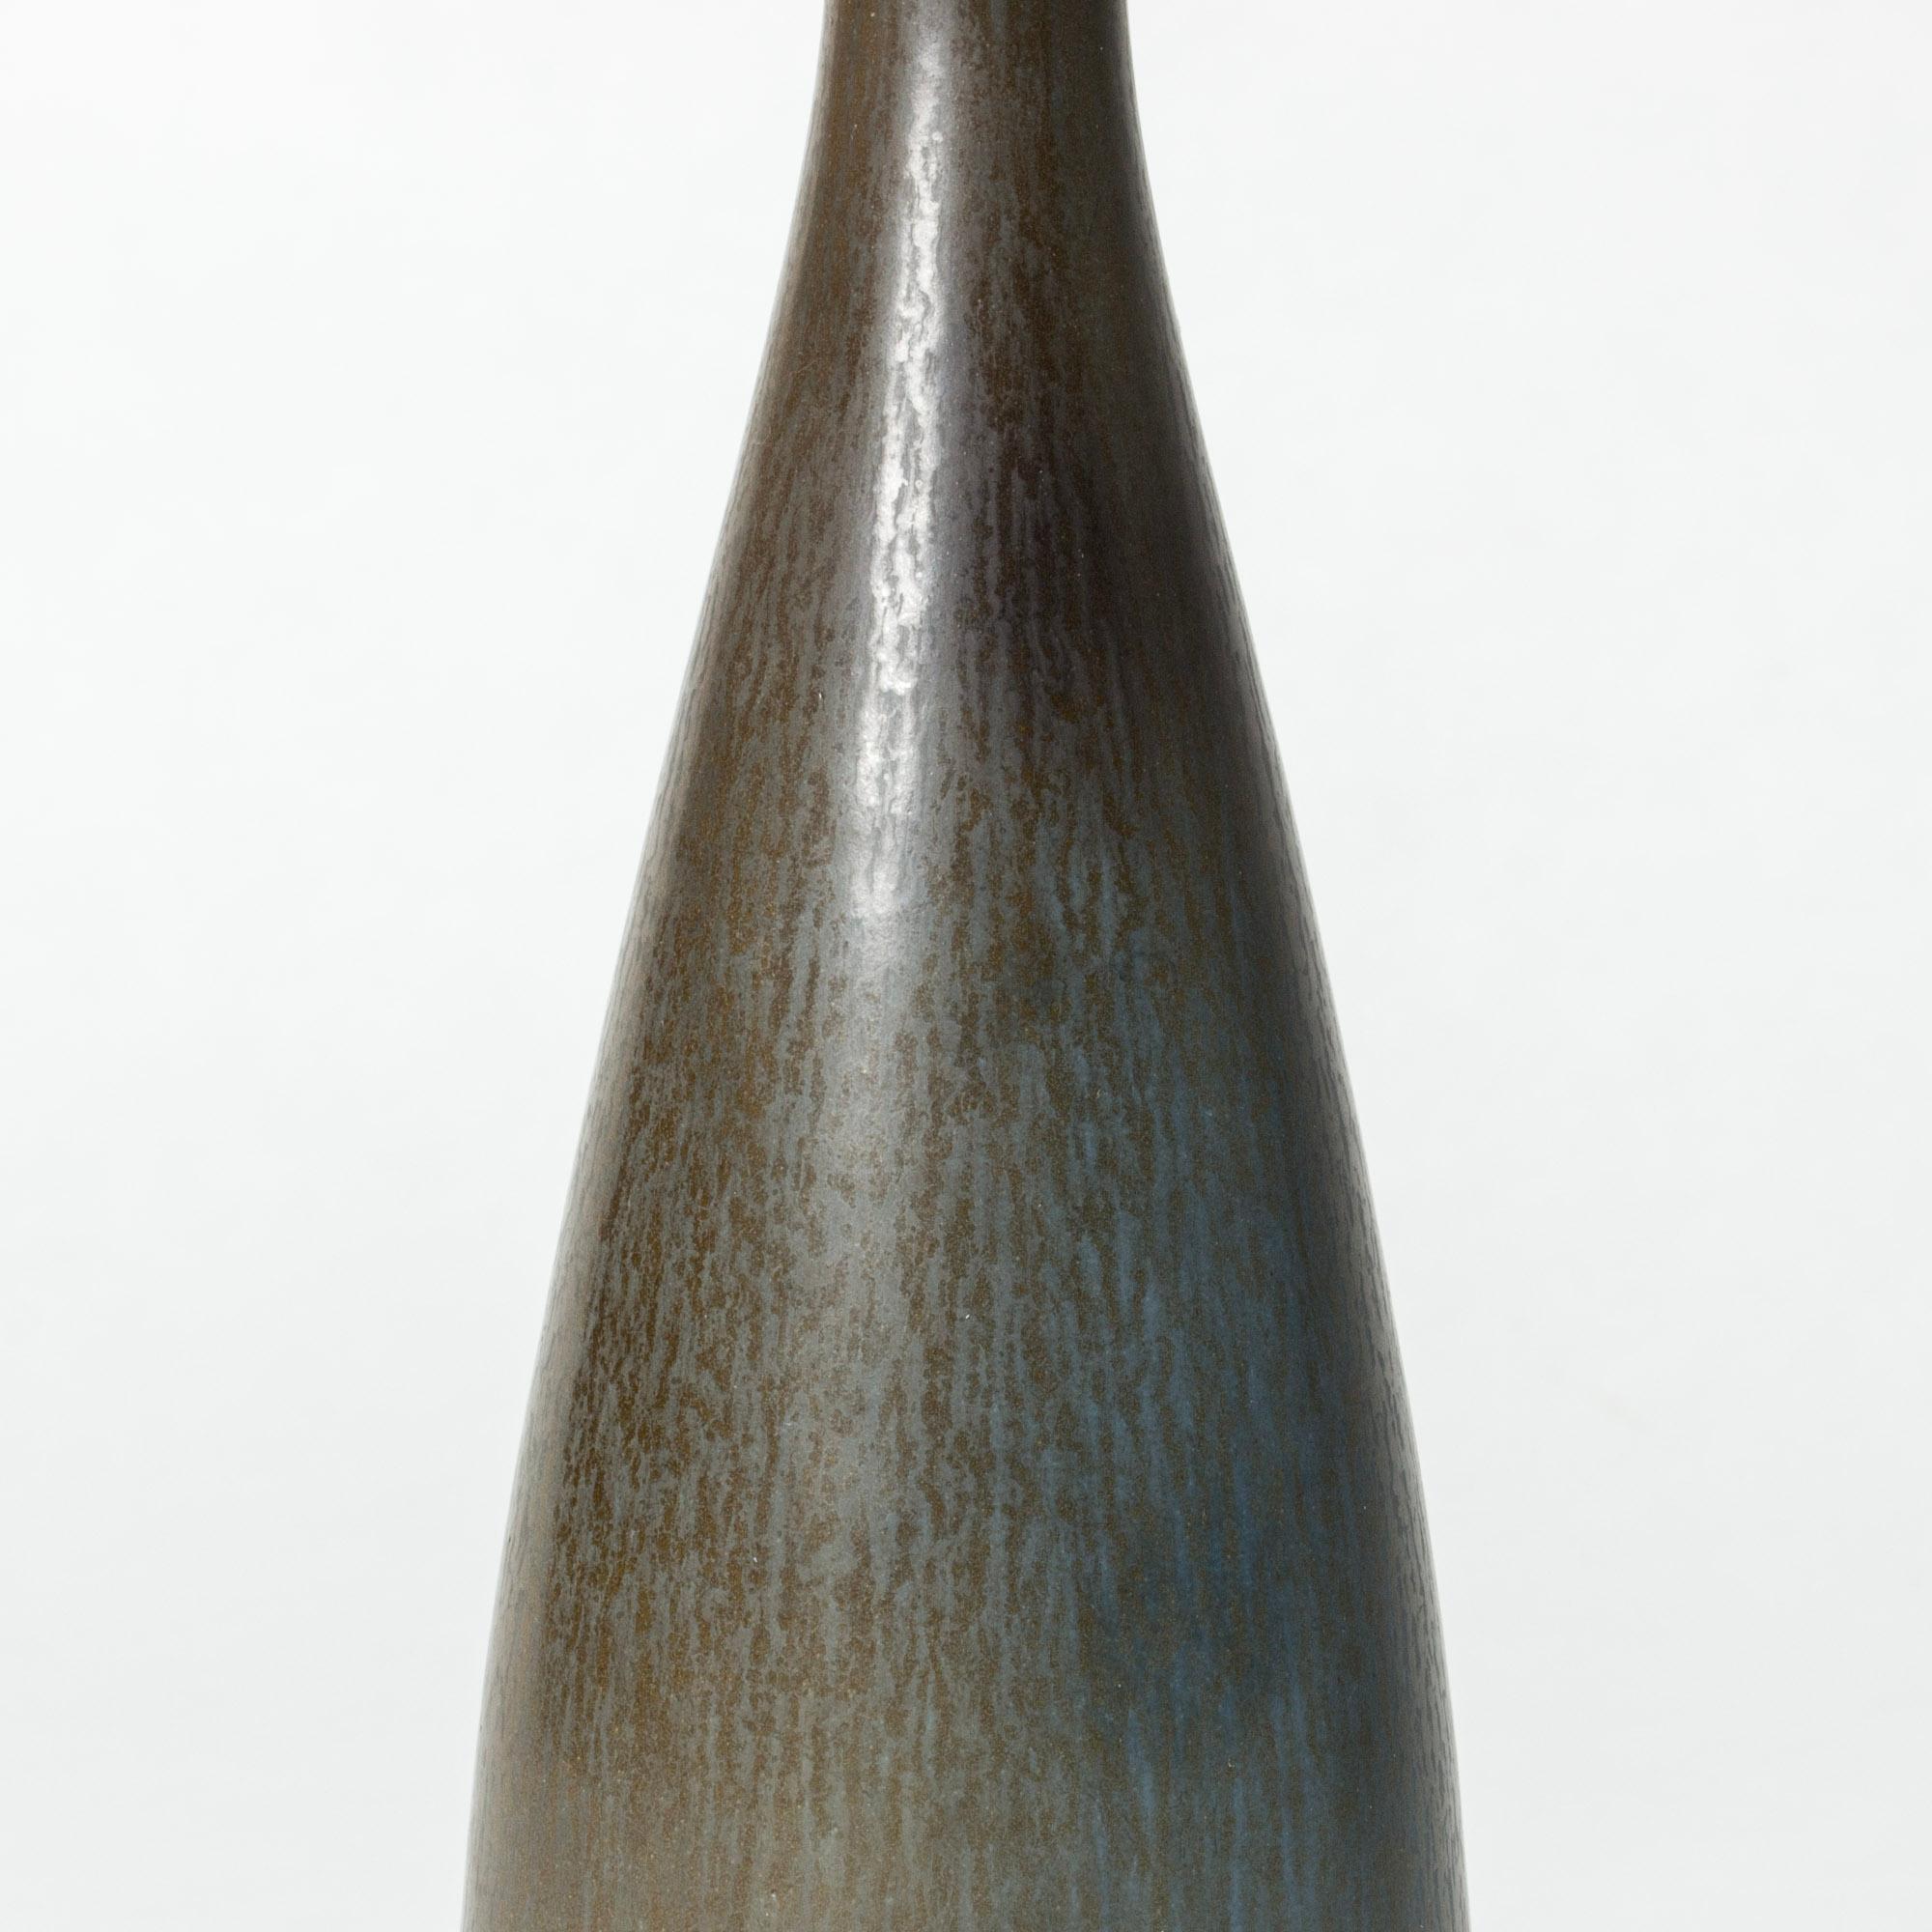 Stoneware vase by Berndt Friberg in an elegant form with a slightly angular silhouette. Dark blue hare’s fur glaze with brownish tones.

Berndt Friberg was a Swedish ceramicist, renowned for his stoneware vases and vessels for Gustavsberg. His pure,